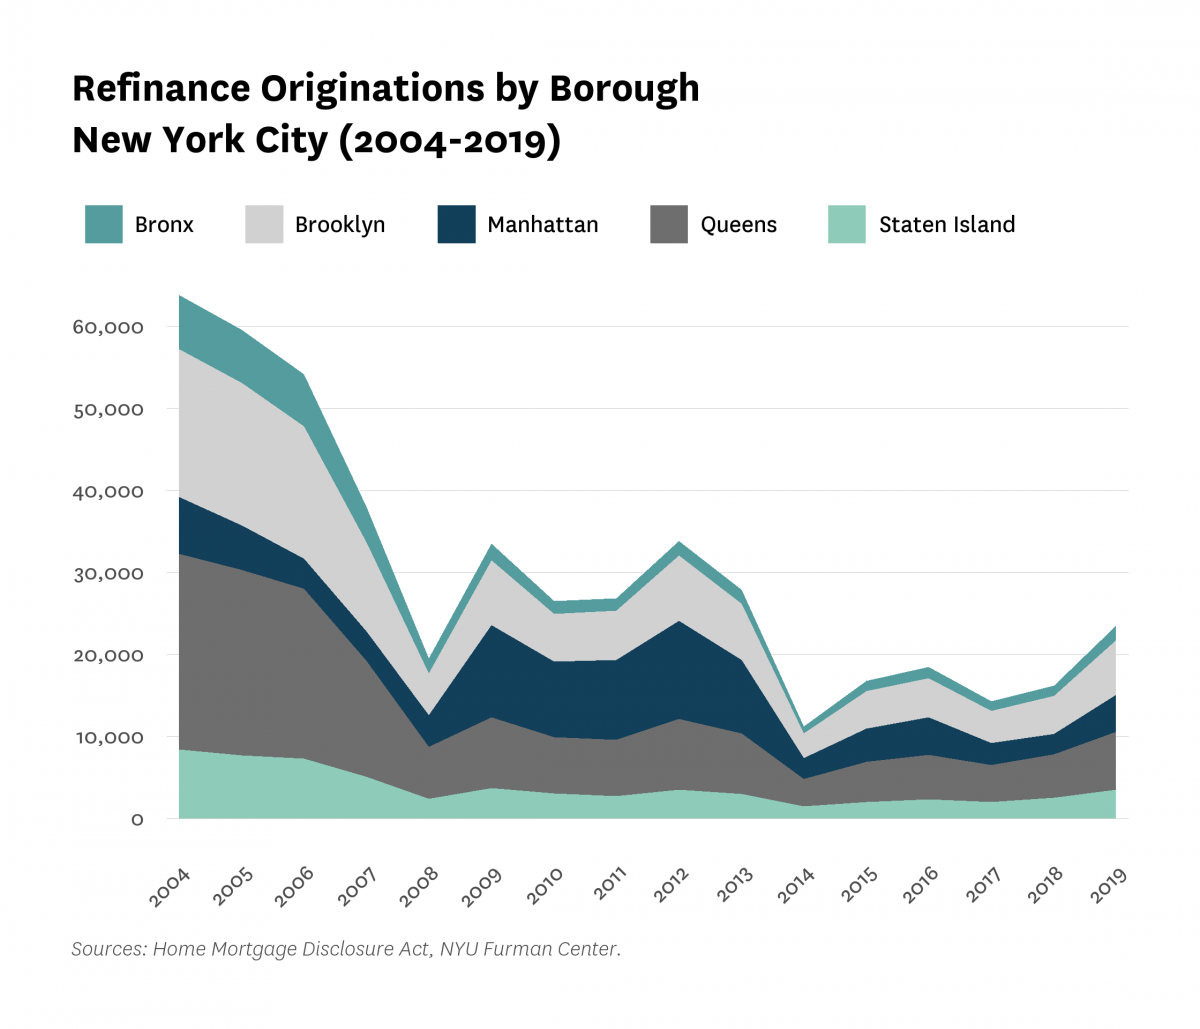 Area chart showing refinance originations by borough in New York City from 2004 to 2019.